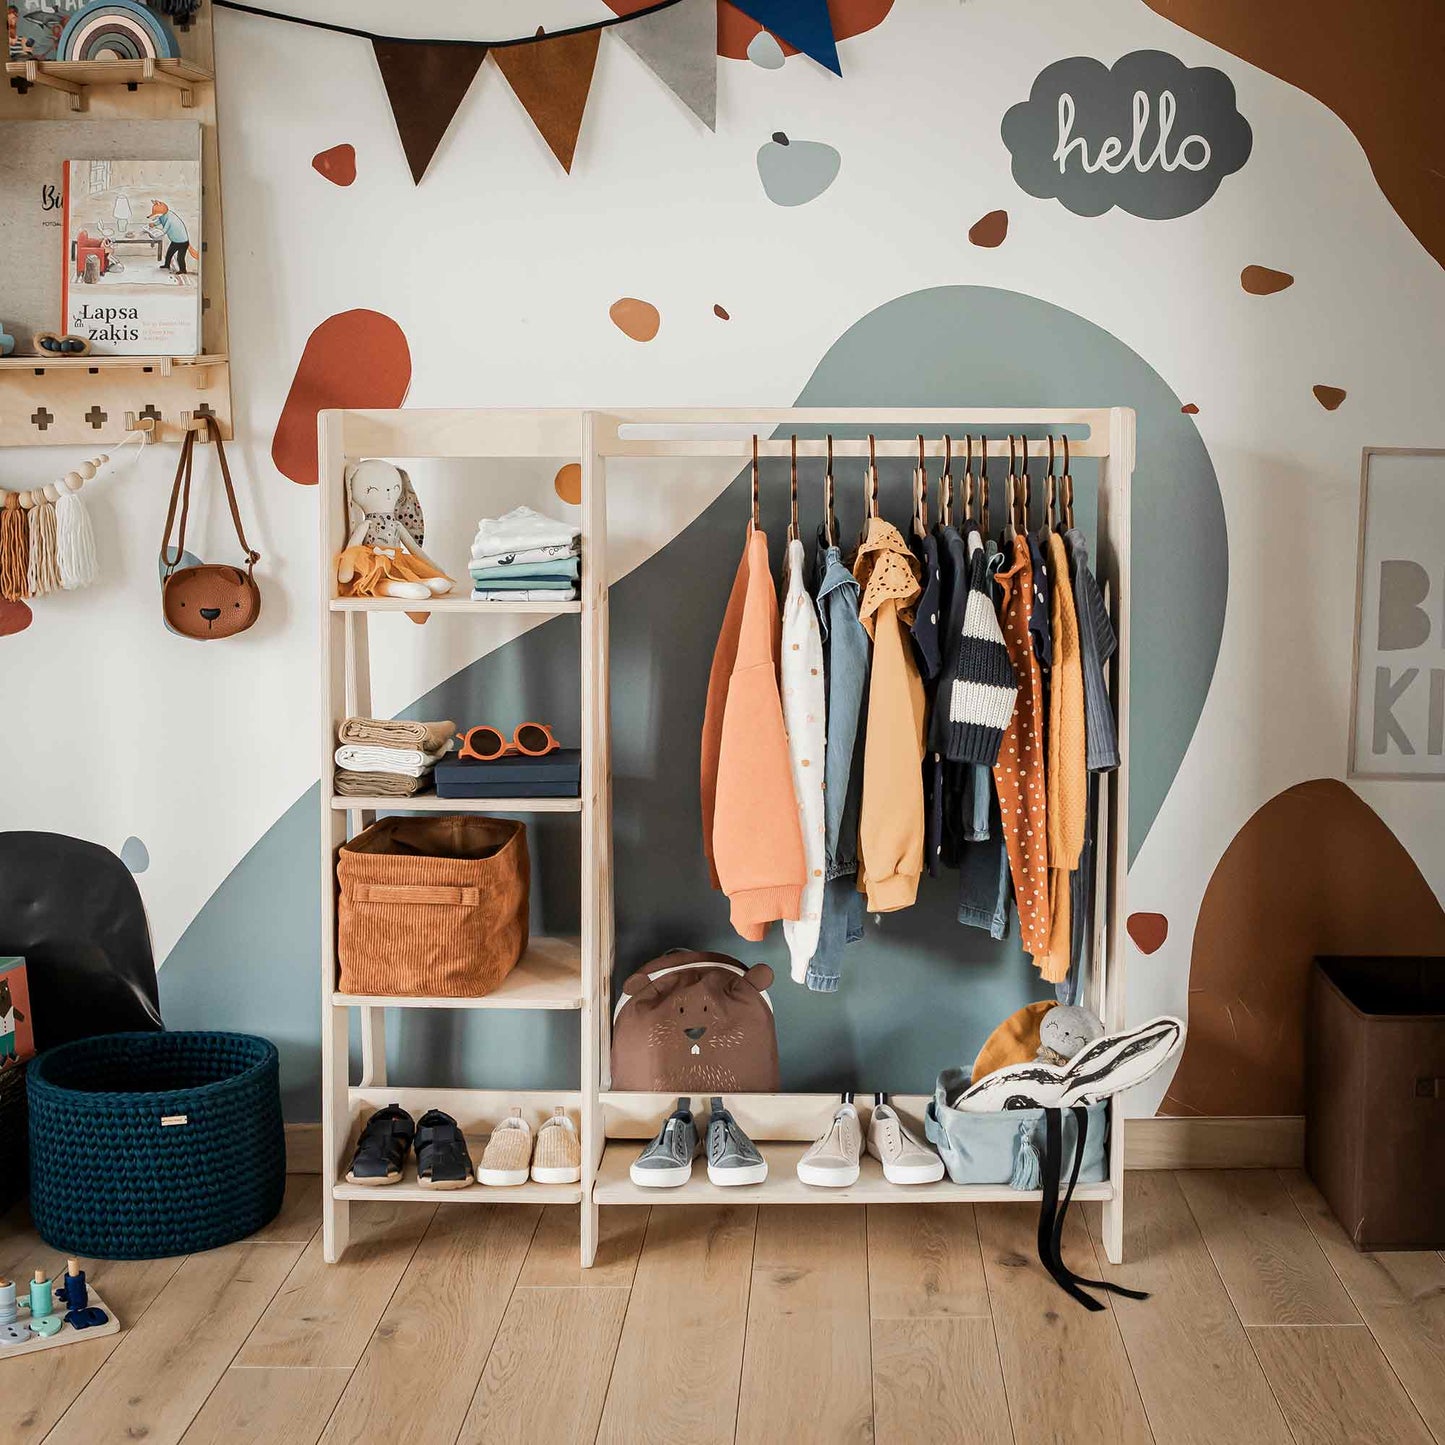 A Children's wardrobe, dress up clothing rack holds a variety of colorful clothing, accessories, and shoes. Storage shelves on the left display baskets and a clock. The background features a painted wall and decorations.